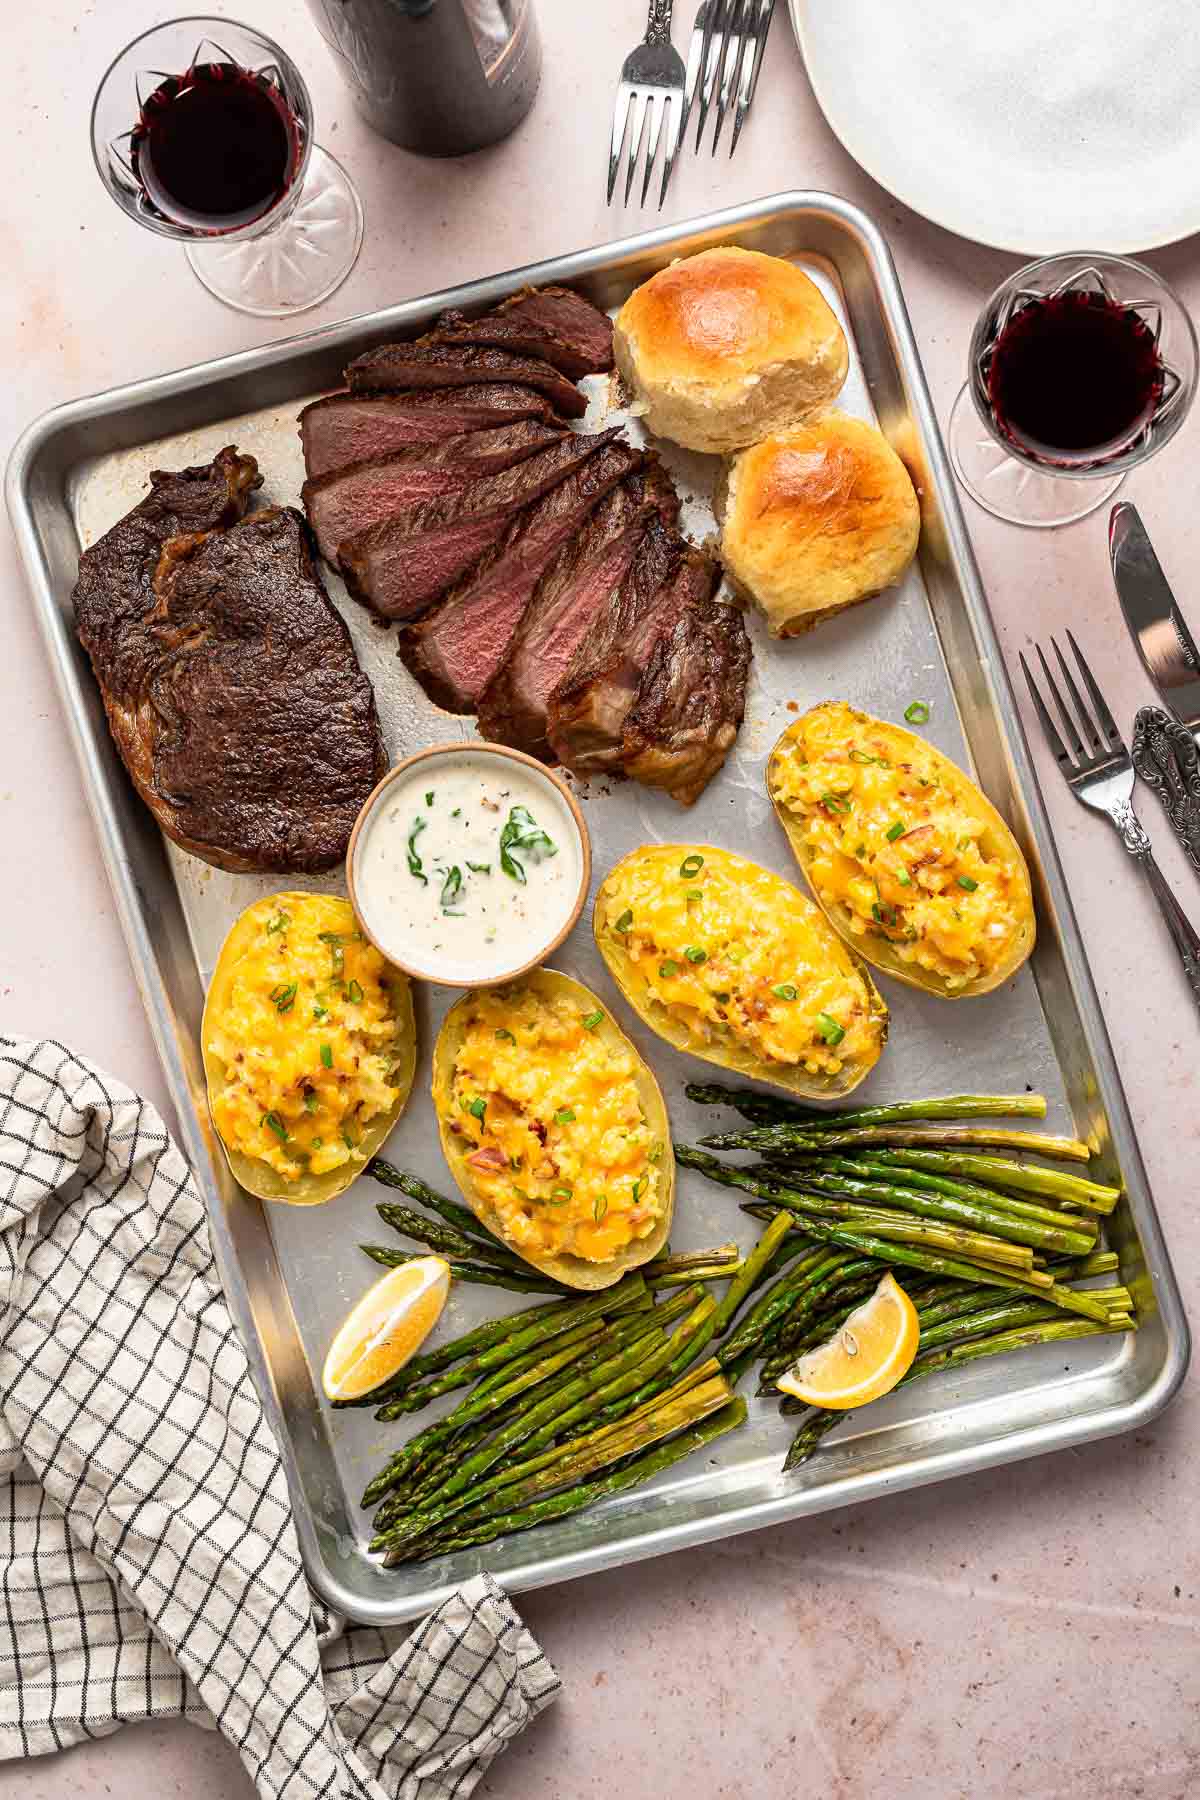 Sheet pan dinner with steak, potatoes, rolls, and asparagus.